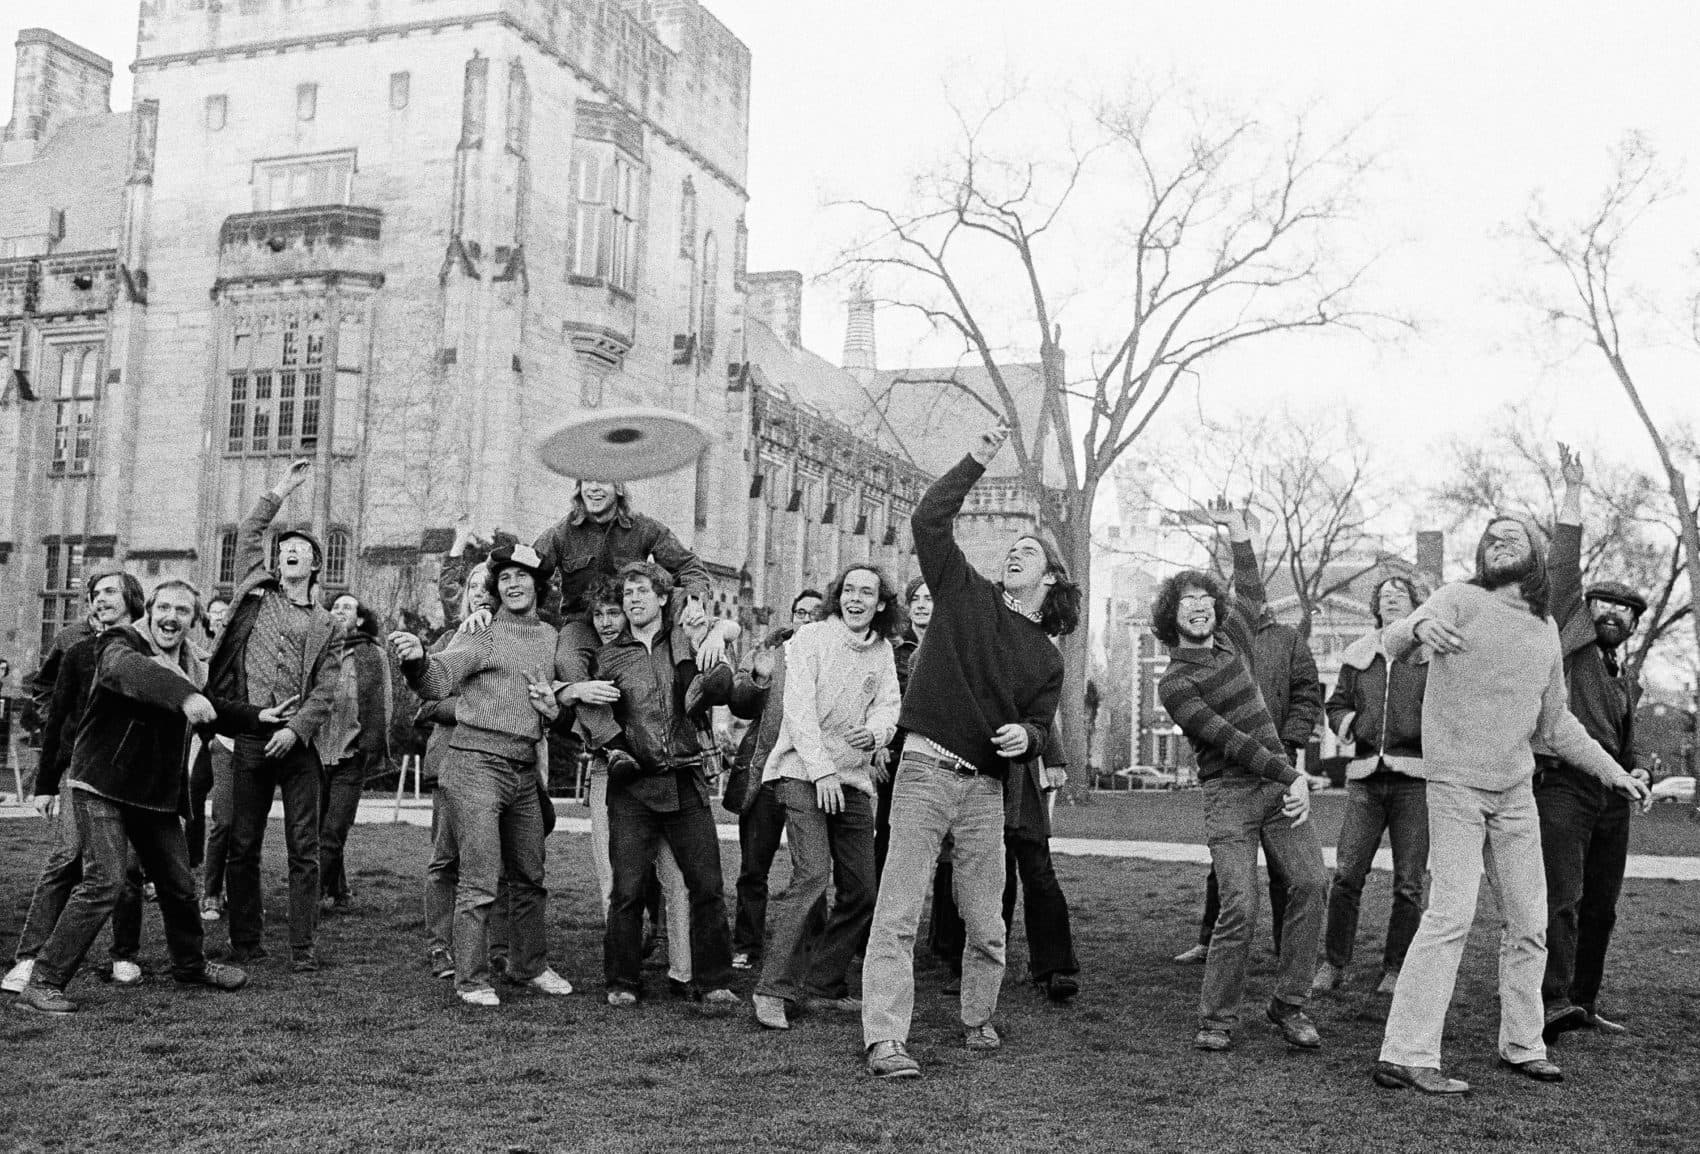 Yale University students join in a Frisbee game Wednesday, April 10, 1974. (Bob Child/AP)